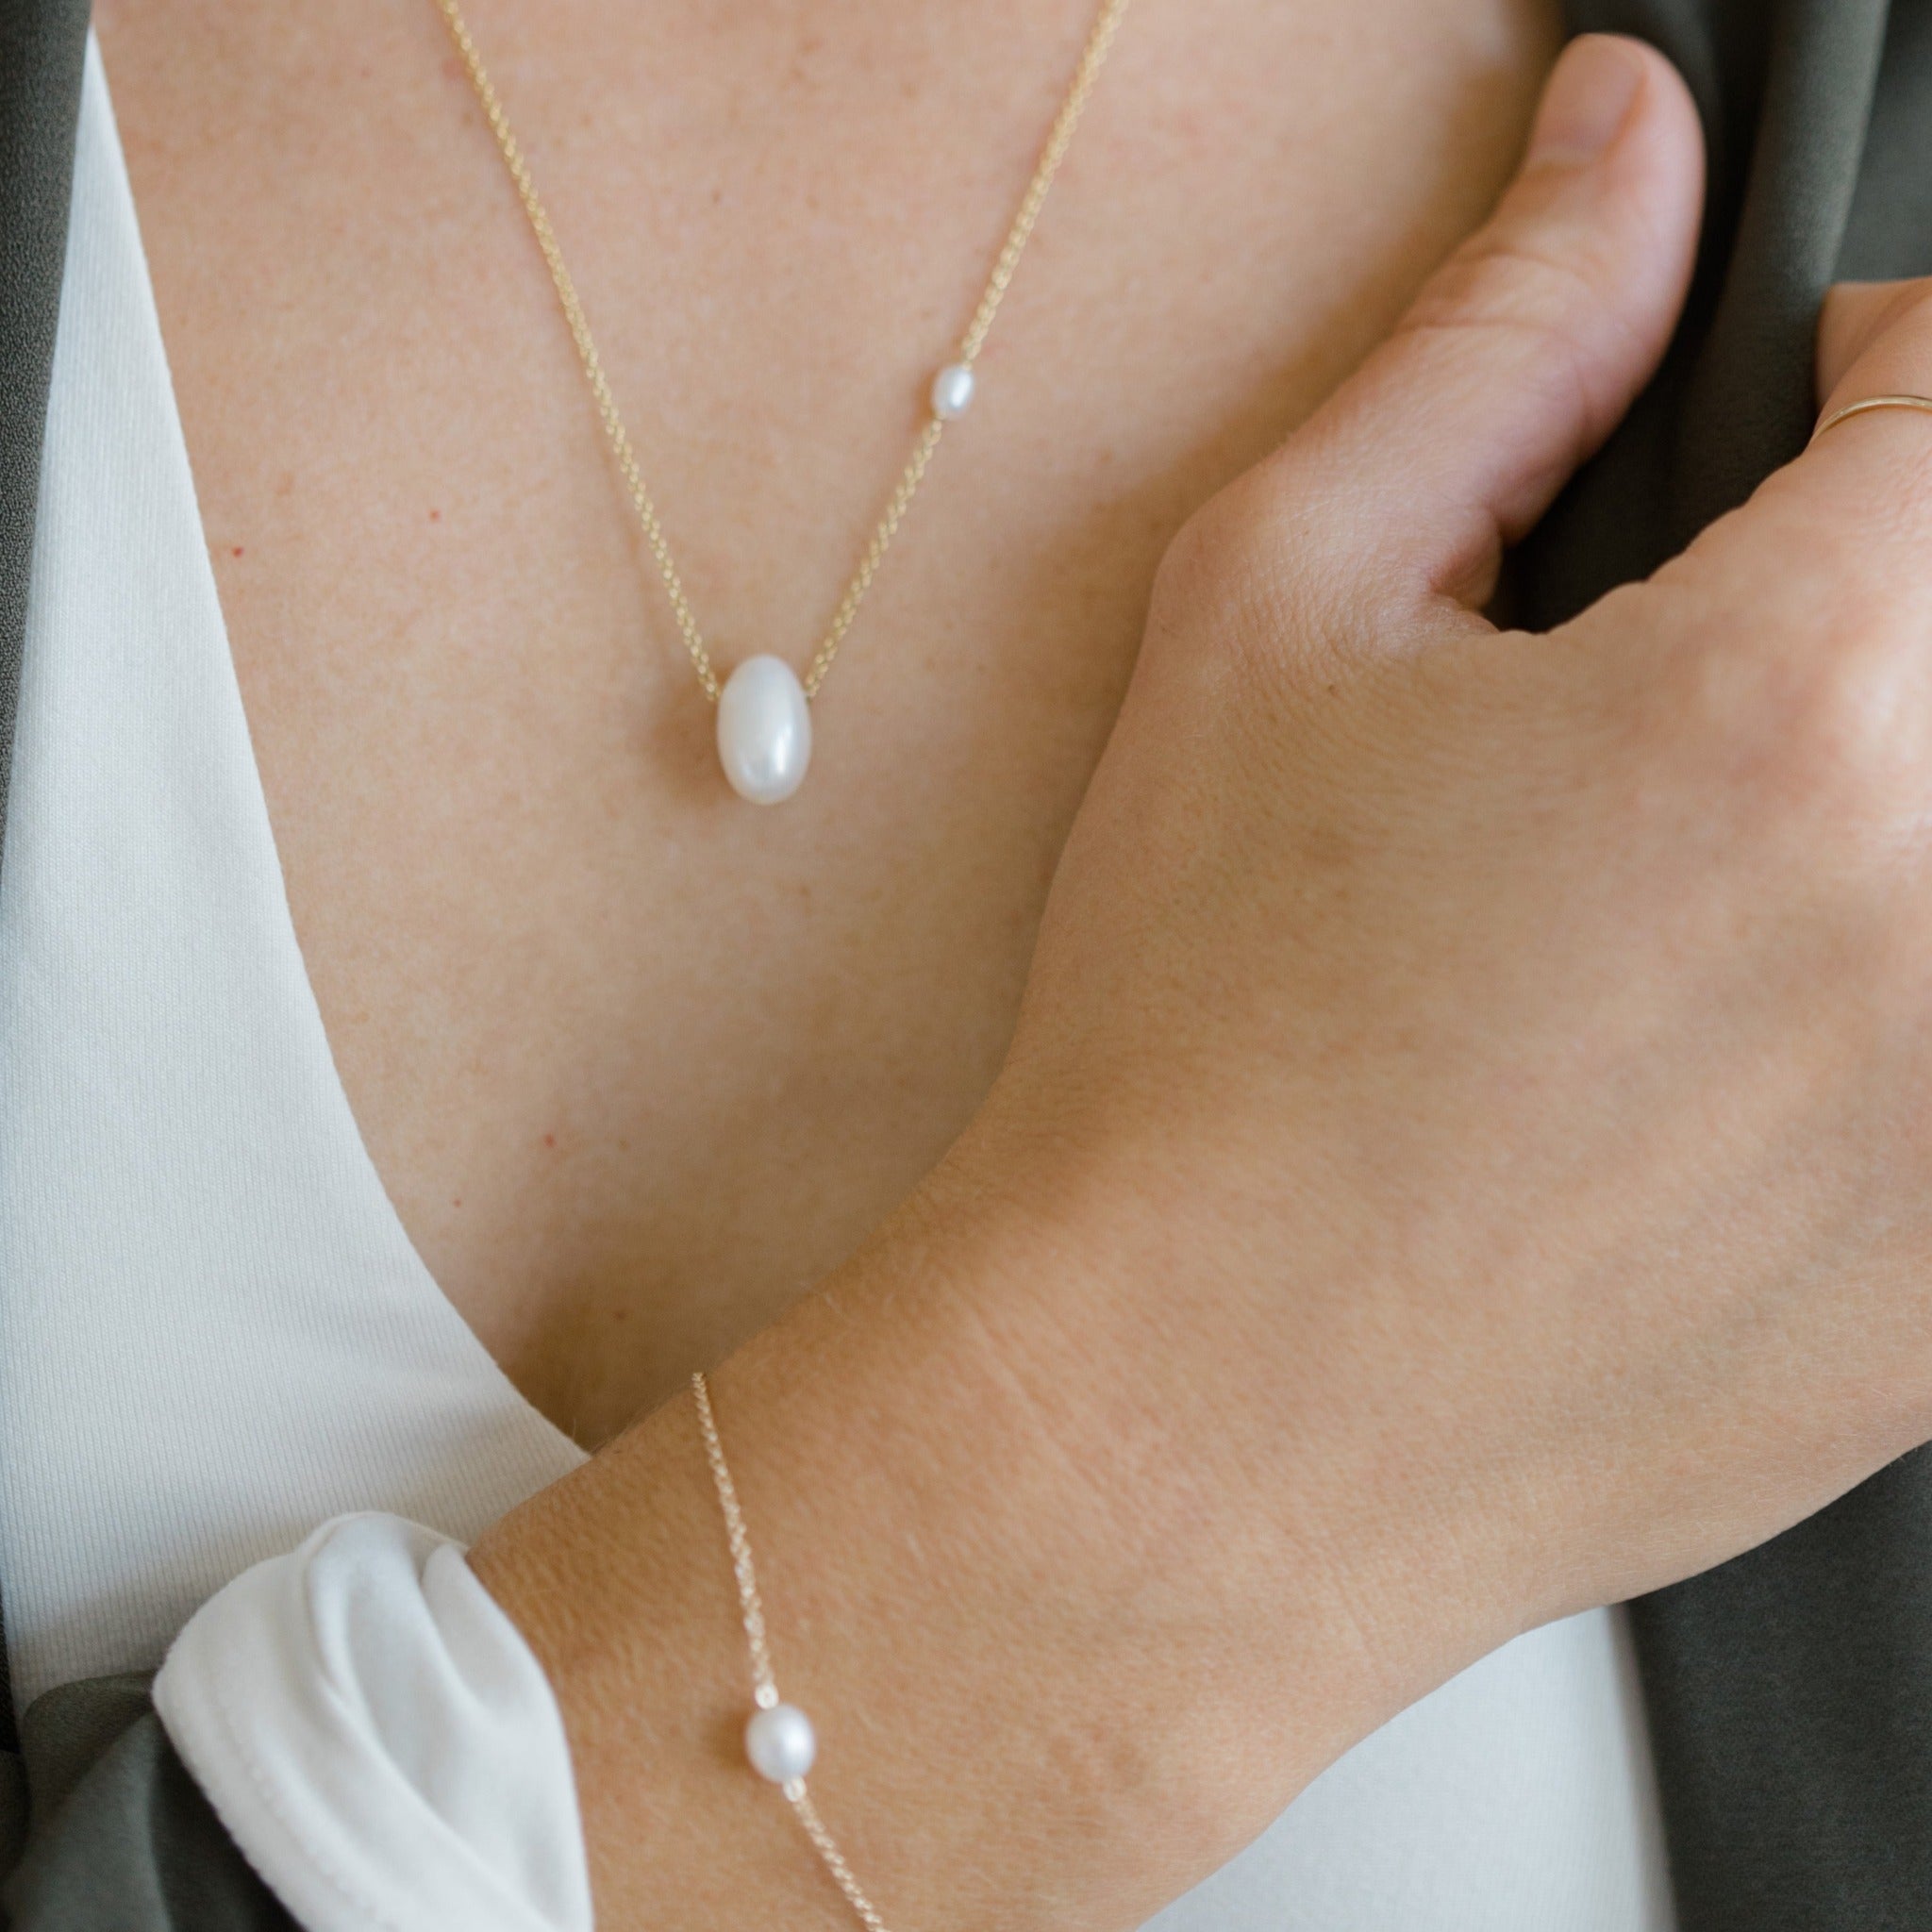 Simple pearl drop necklace with a floating pearl. White oval pearls on a 14k gold chain.